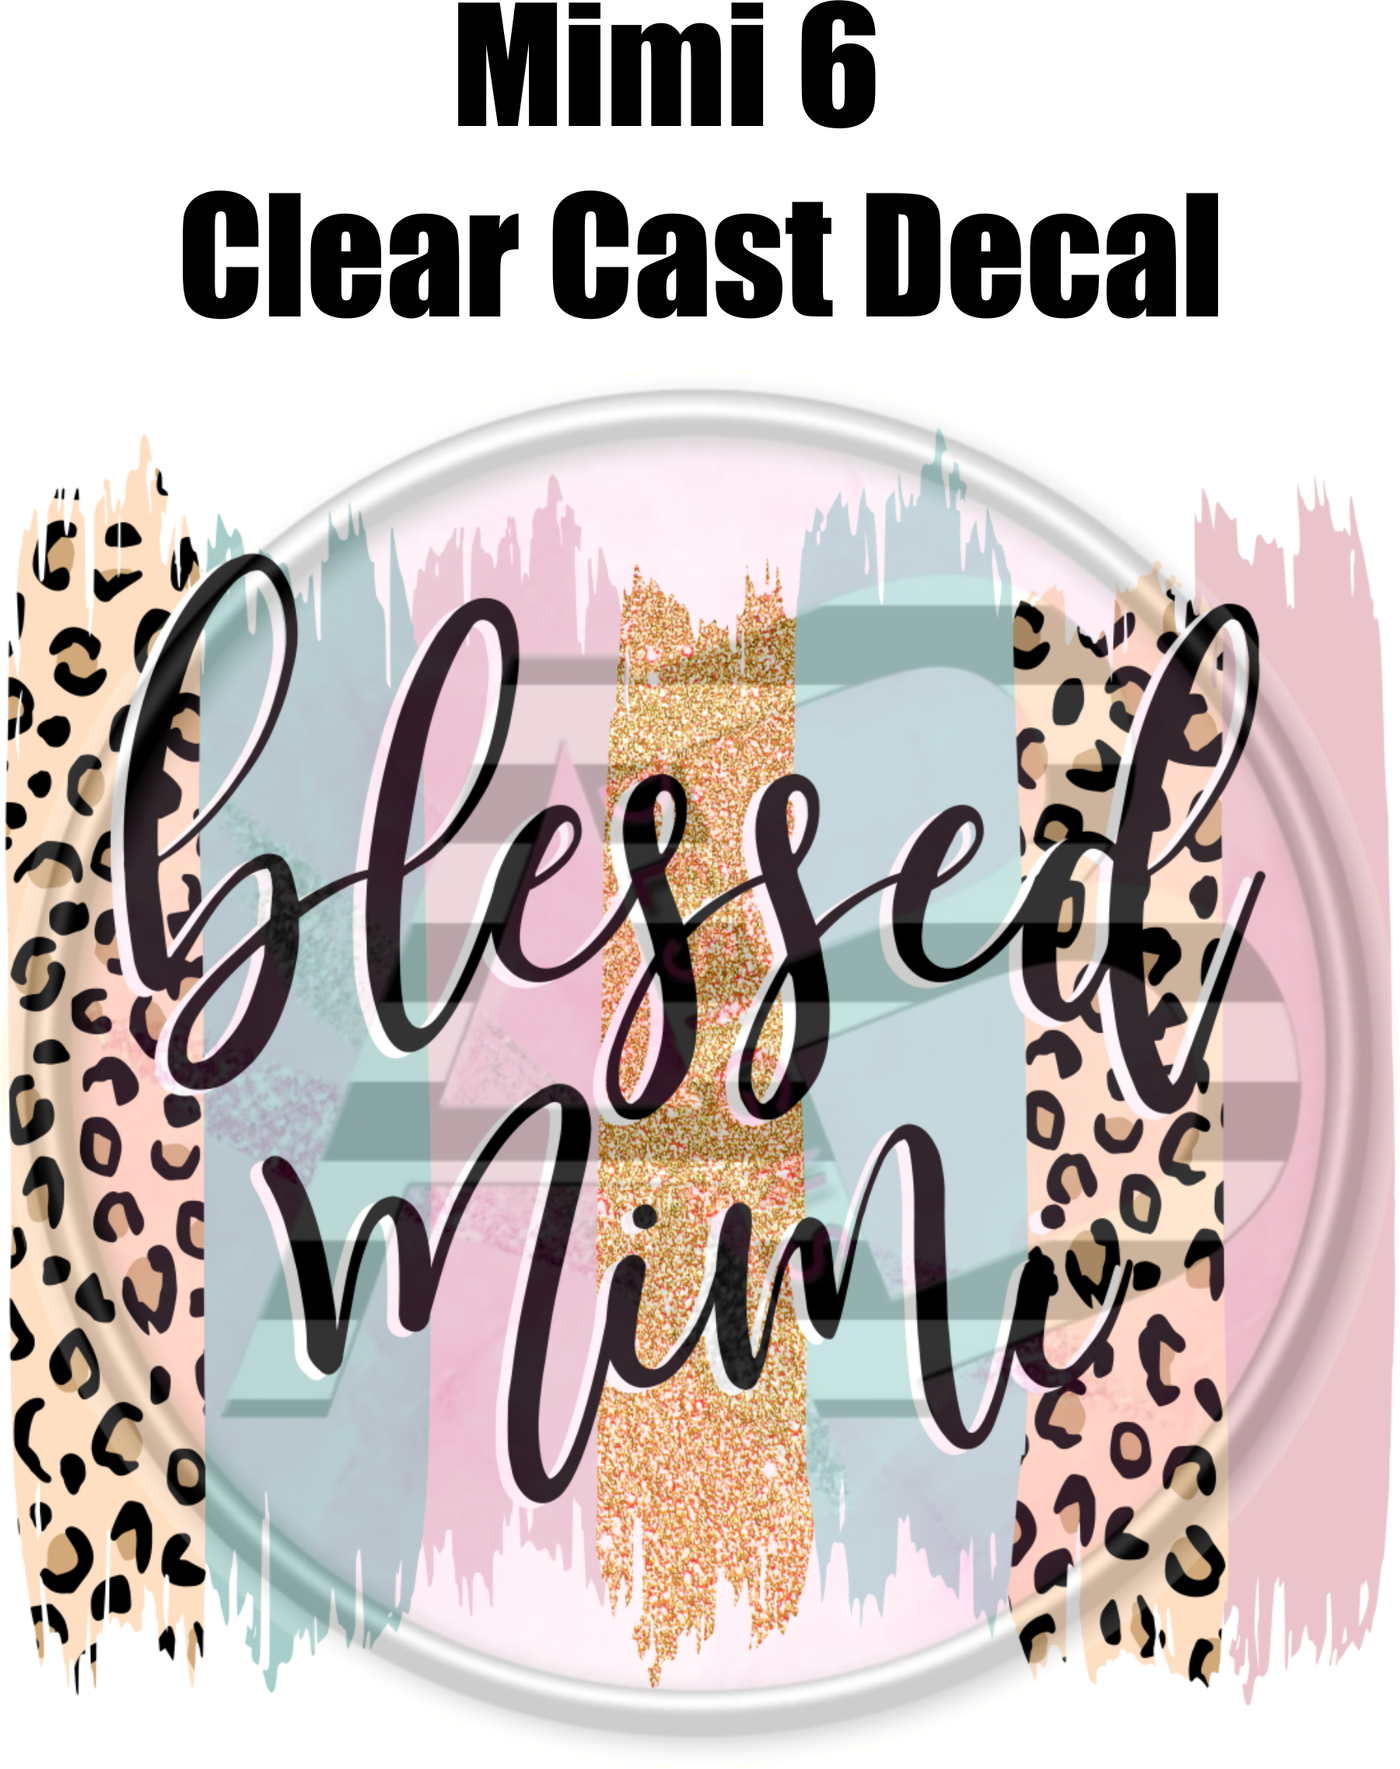 Mimi 6 - Clear Cast Decal